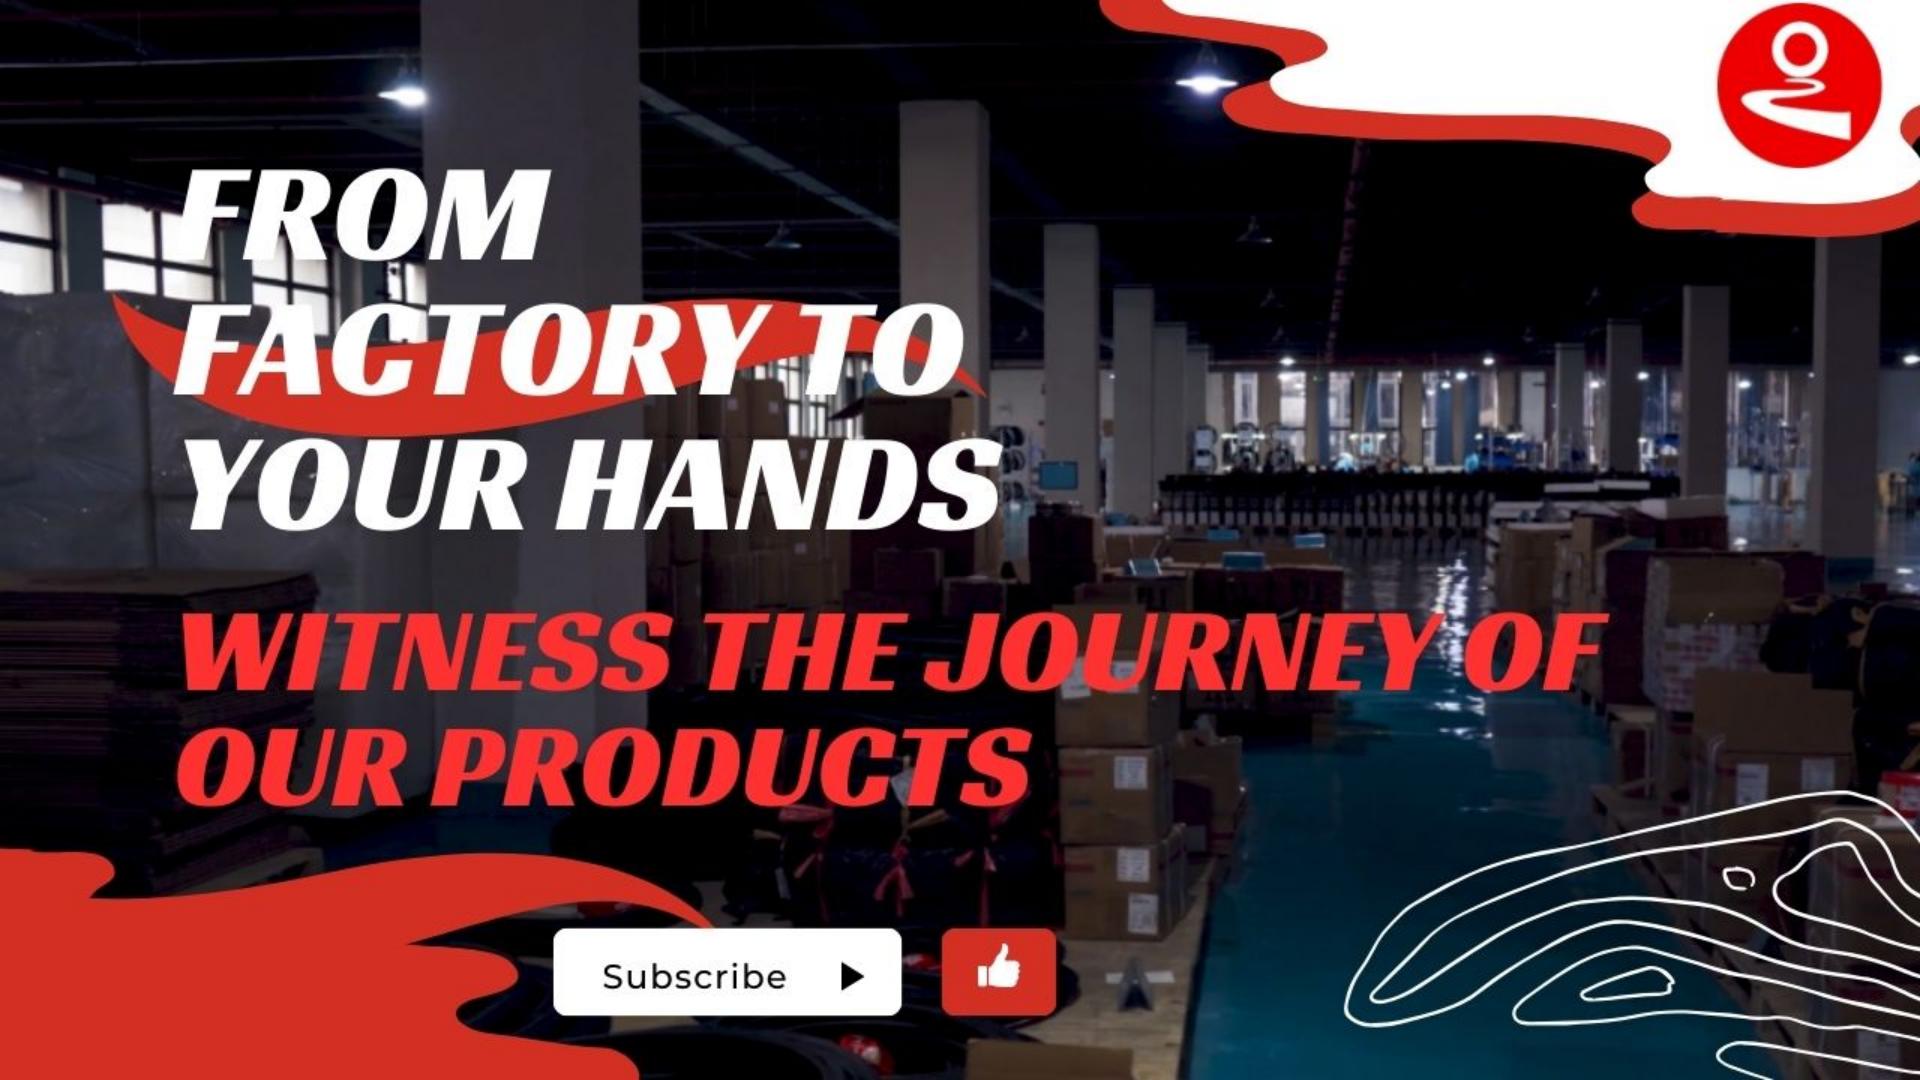 From Factory to Your Hands: Witness the Journey of Our Products